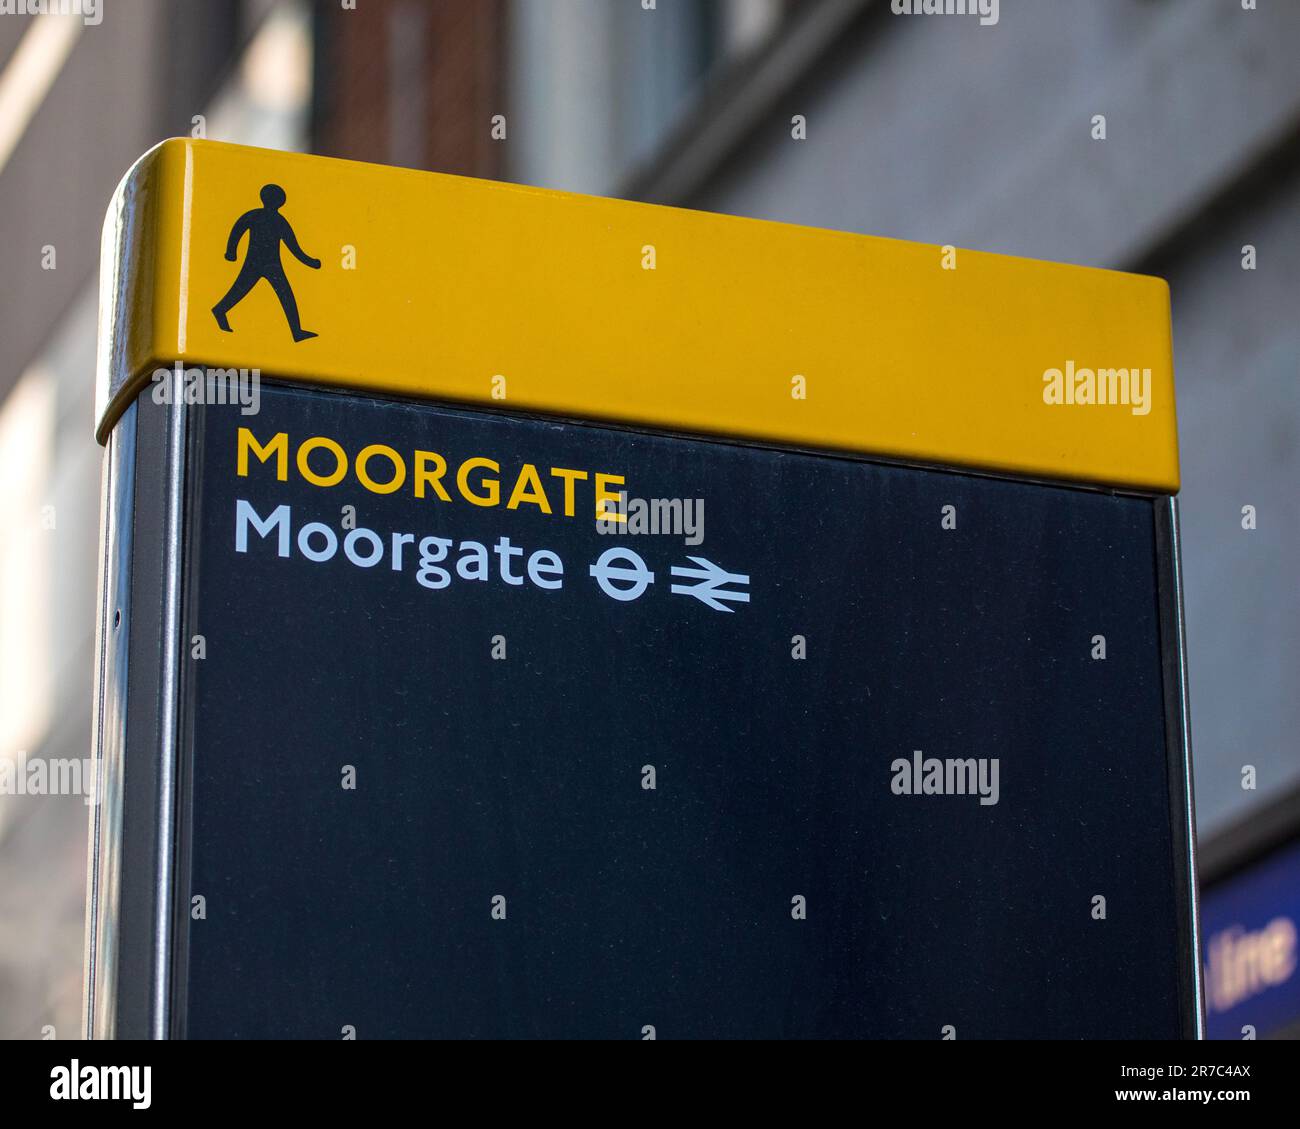 London, UK - March 2nd 2023: Close-up of a pedestrian sign, marking the location of Moorgate and Moorgate station, in the City of London, UK. Stock Photo